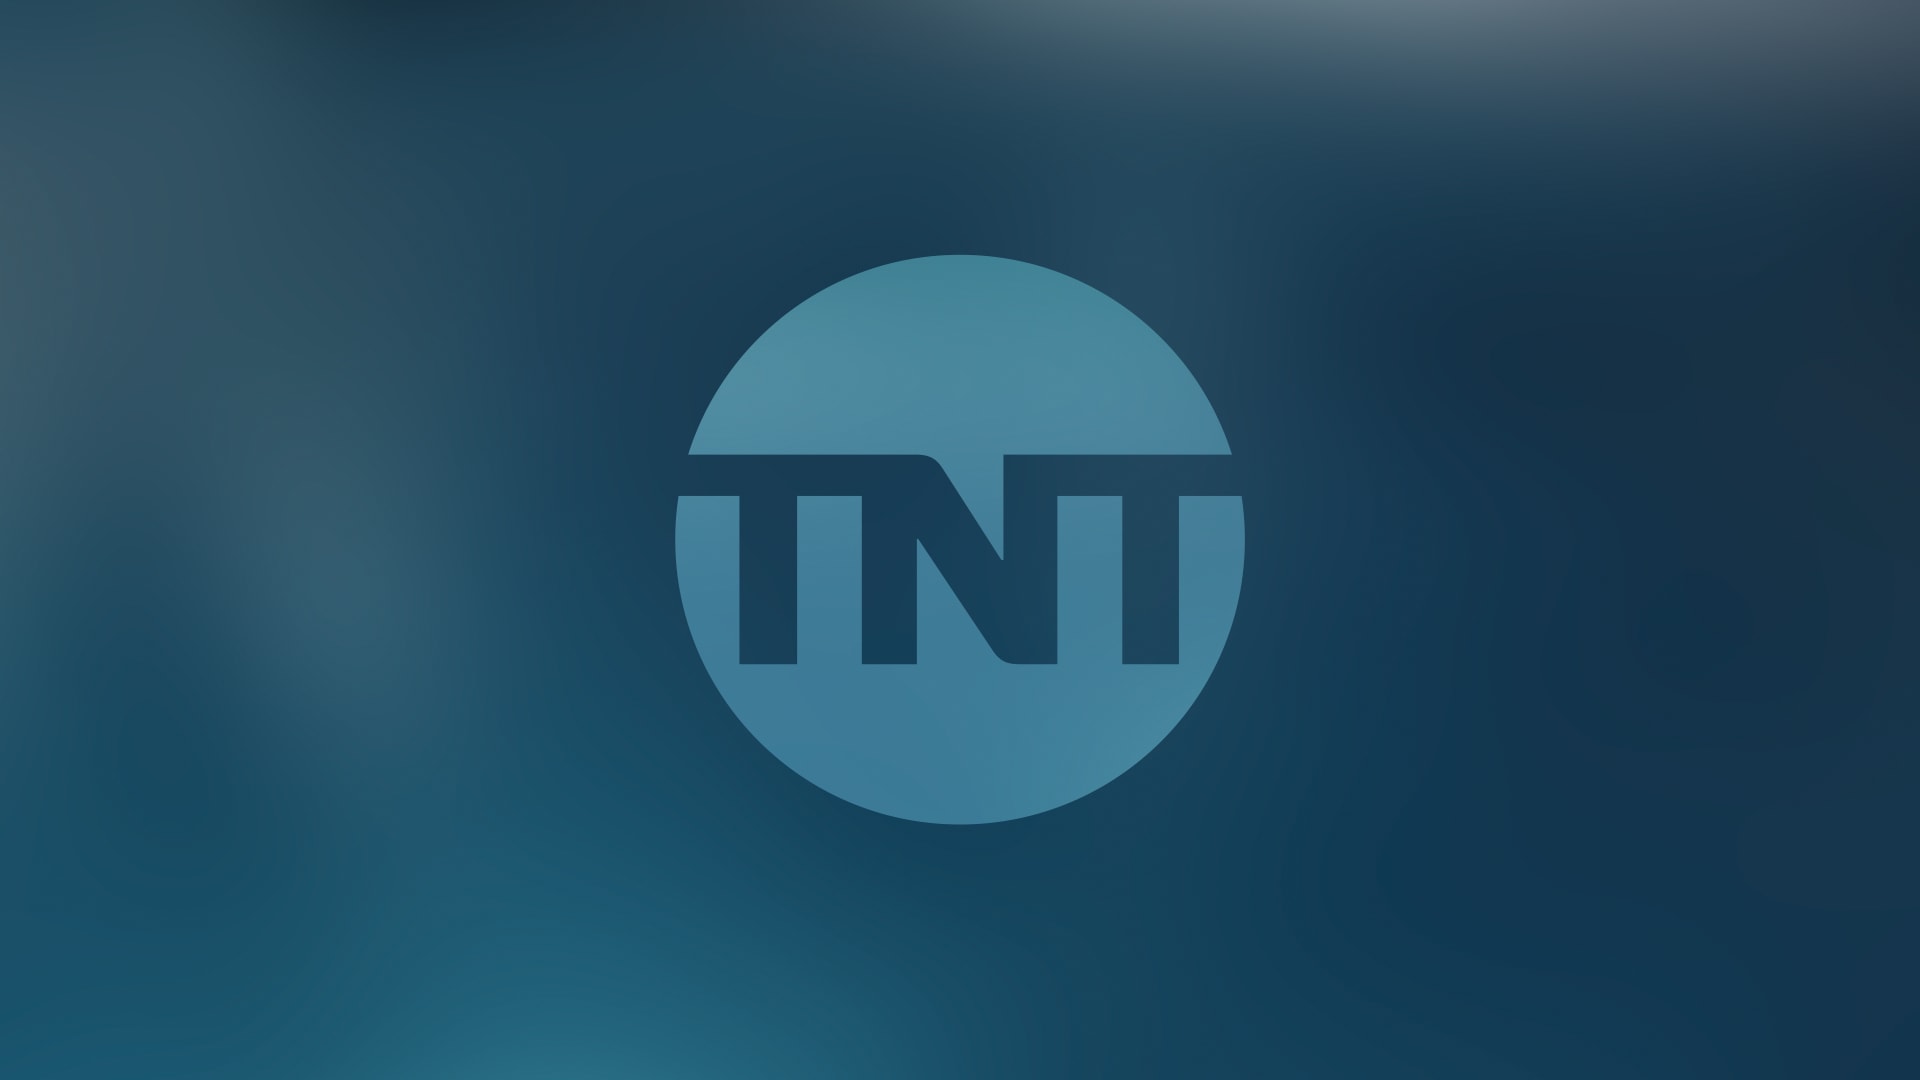 The Death of Cable TV: TNT No Longer Airs New Original Scripted Programs